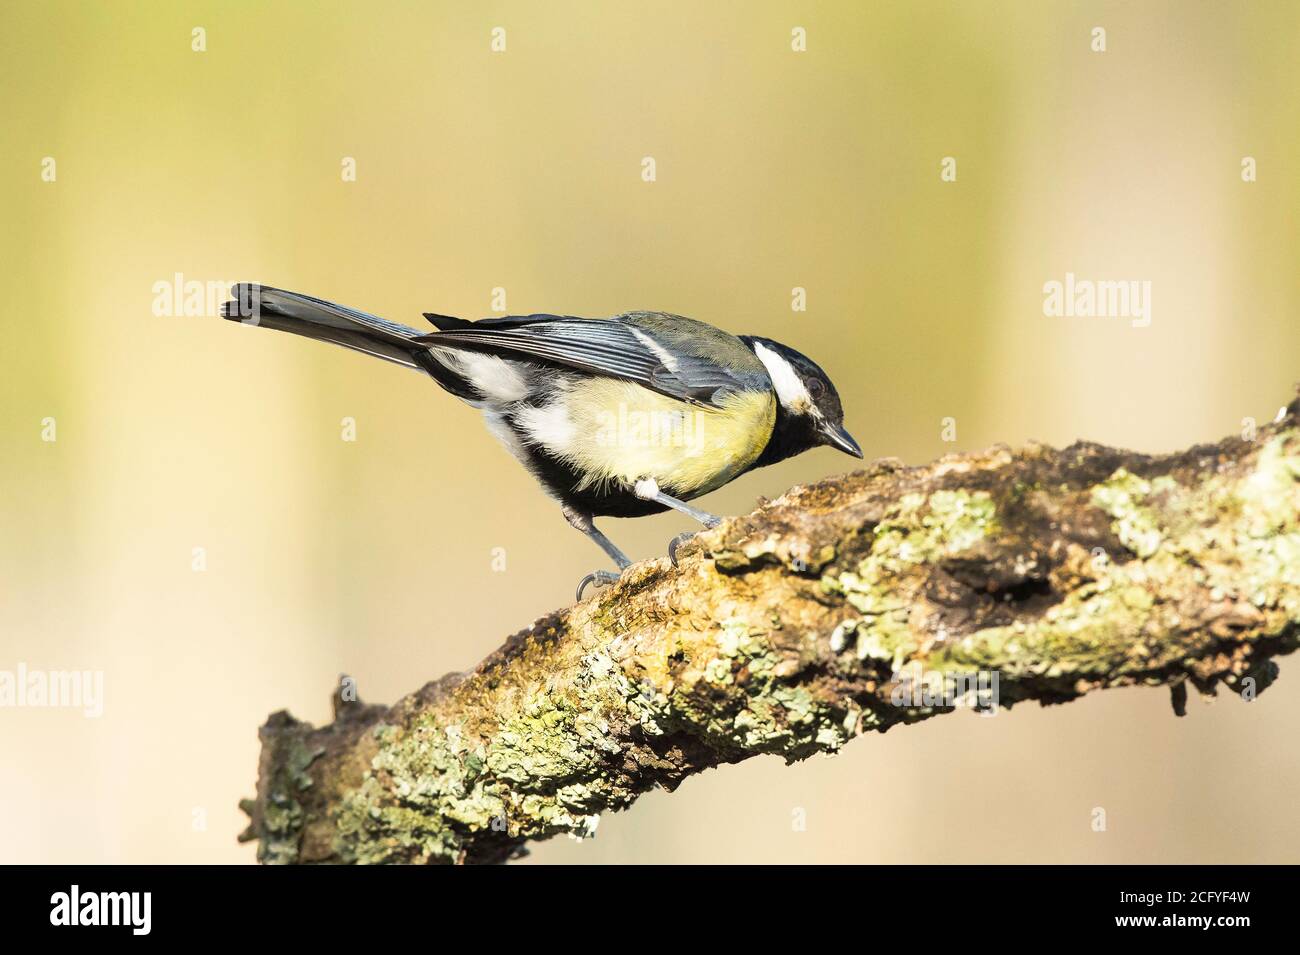 https://c8.alamy.com/comp/2CFYF4W/the-great-tit-parus-major-is-a-passerine-bird-in-the-tit-family-paridae-it-is-a-widespread-and-common-species-throughout-europe-middle-east-etc-2CFYF4W.jpg